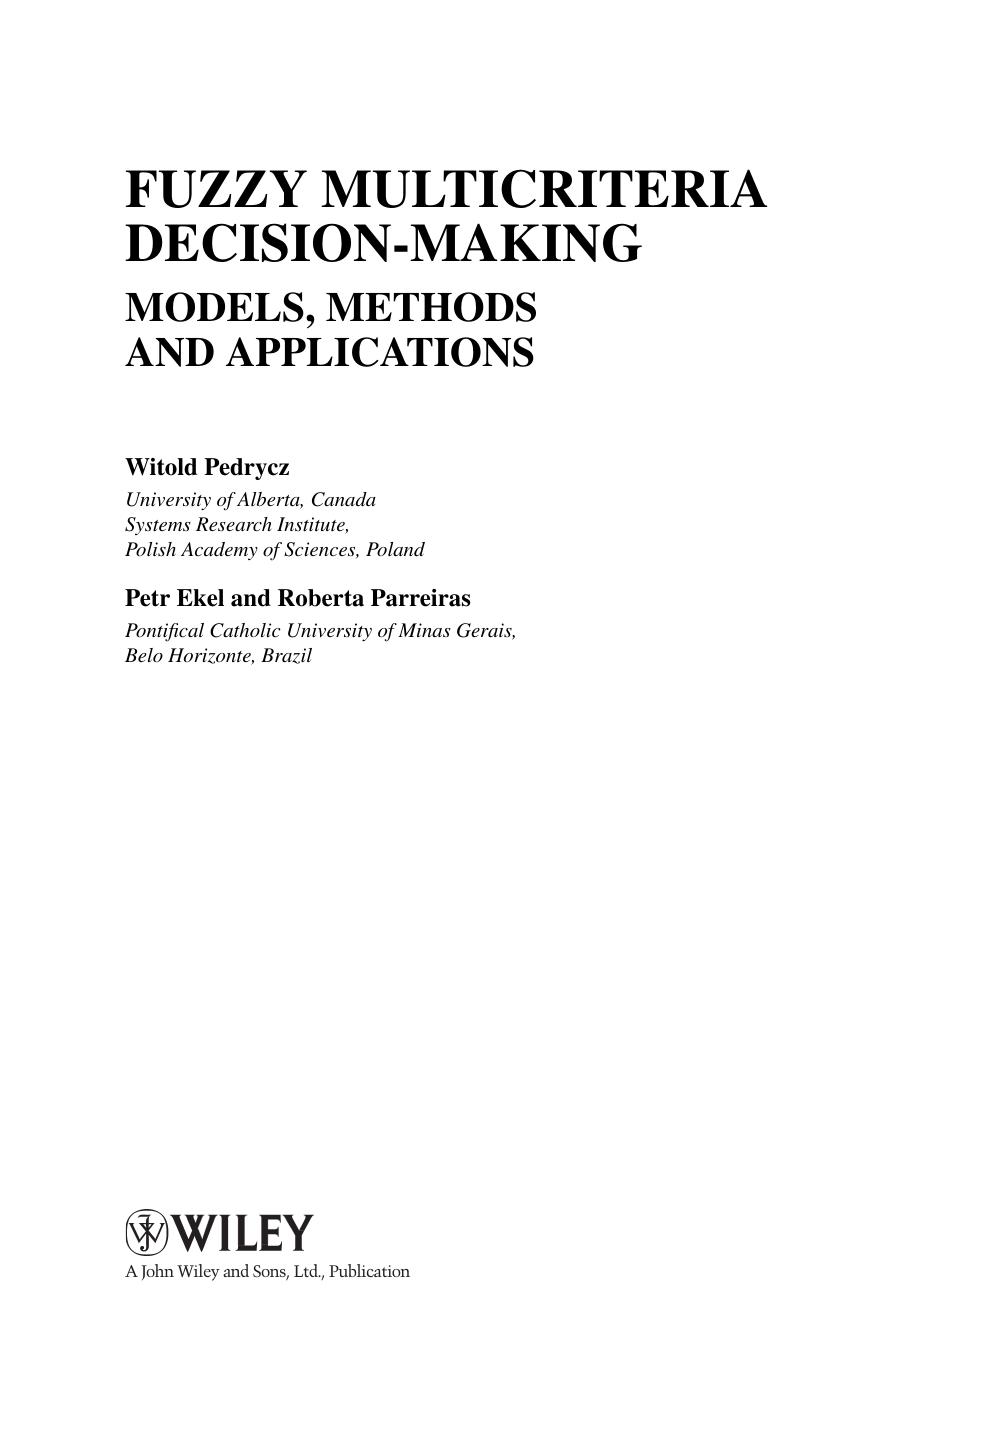 Fuzzy Multicriteria Decision-Making: Models, Methods and Applications